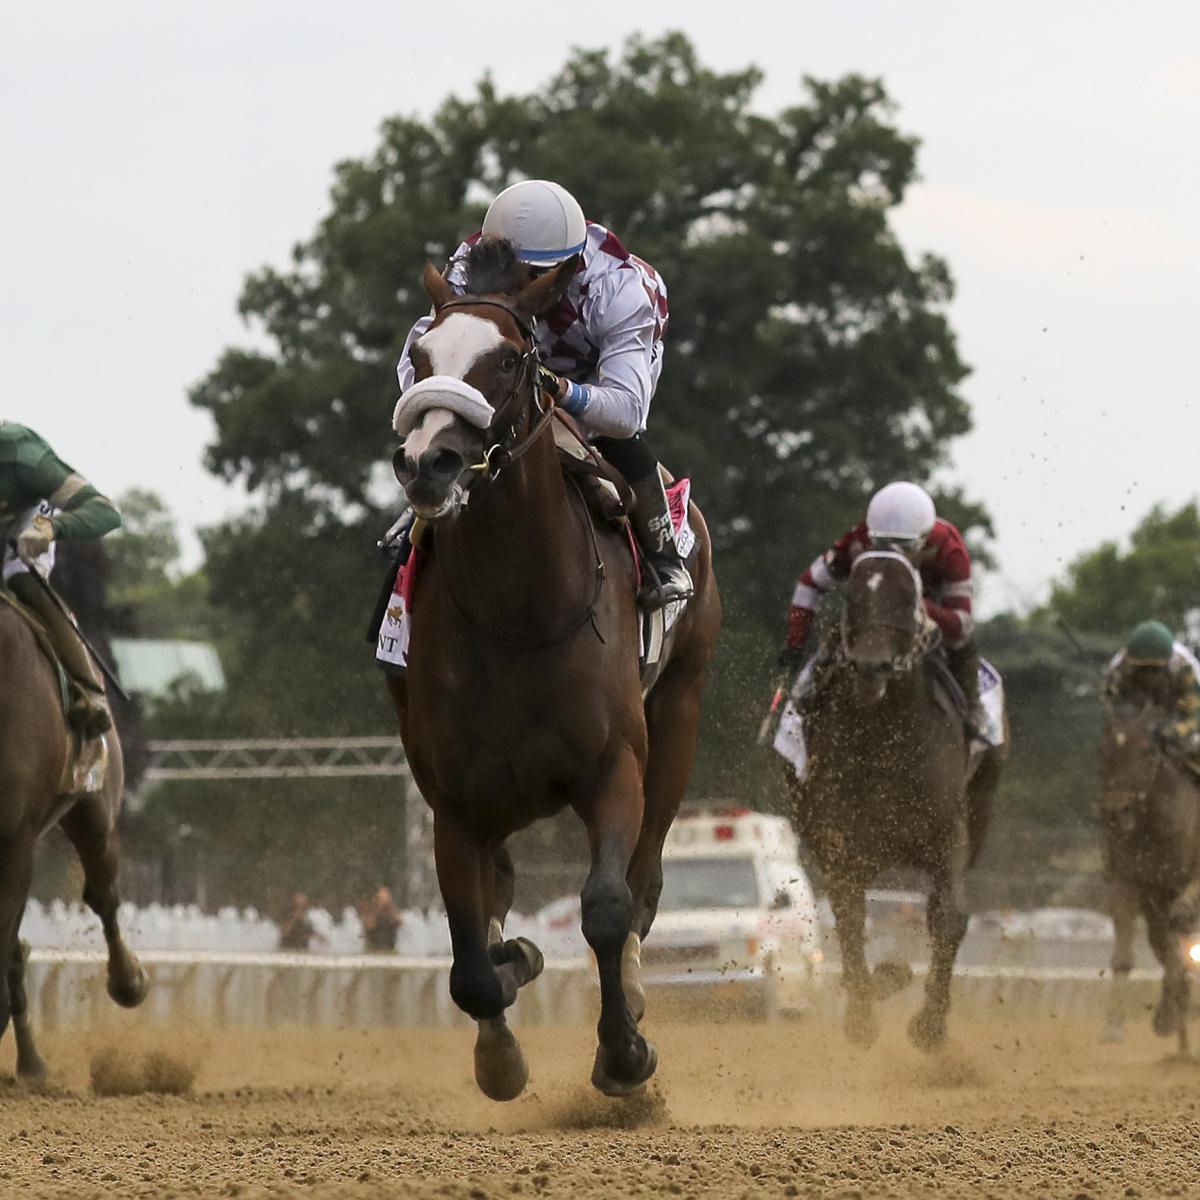 Kentucky Derby Draw 2020 Post Positions Viewing Info, Field and Race